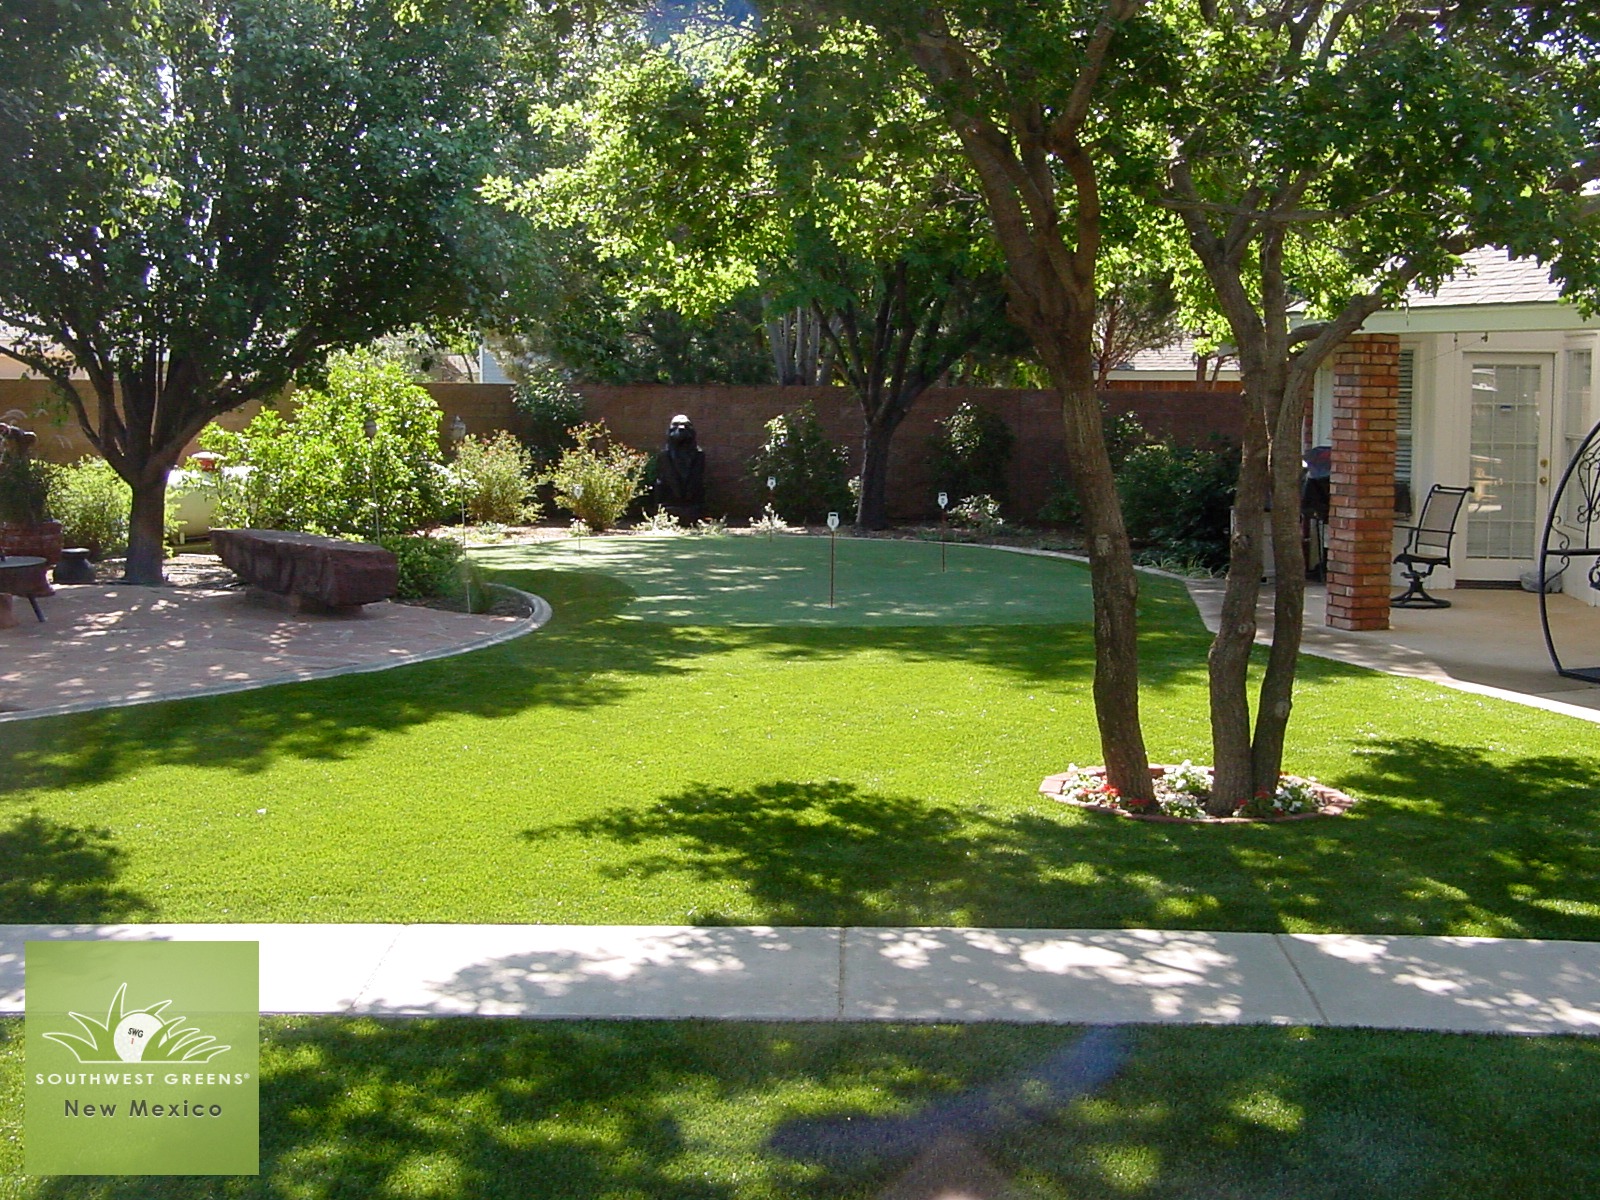 Create breathtaking curb appeal with custom artificial grass landscape designs from Southwest Greens New Mexico.